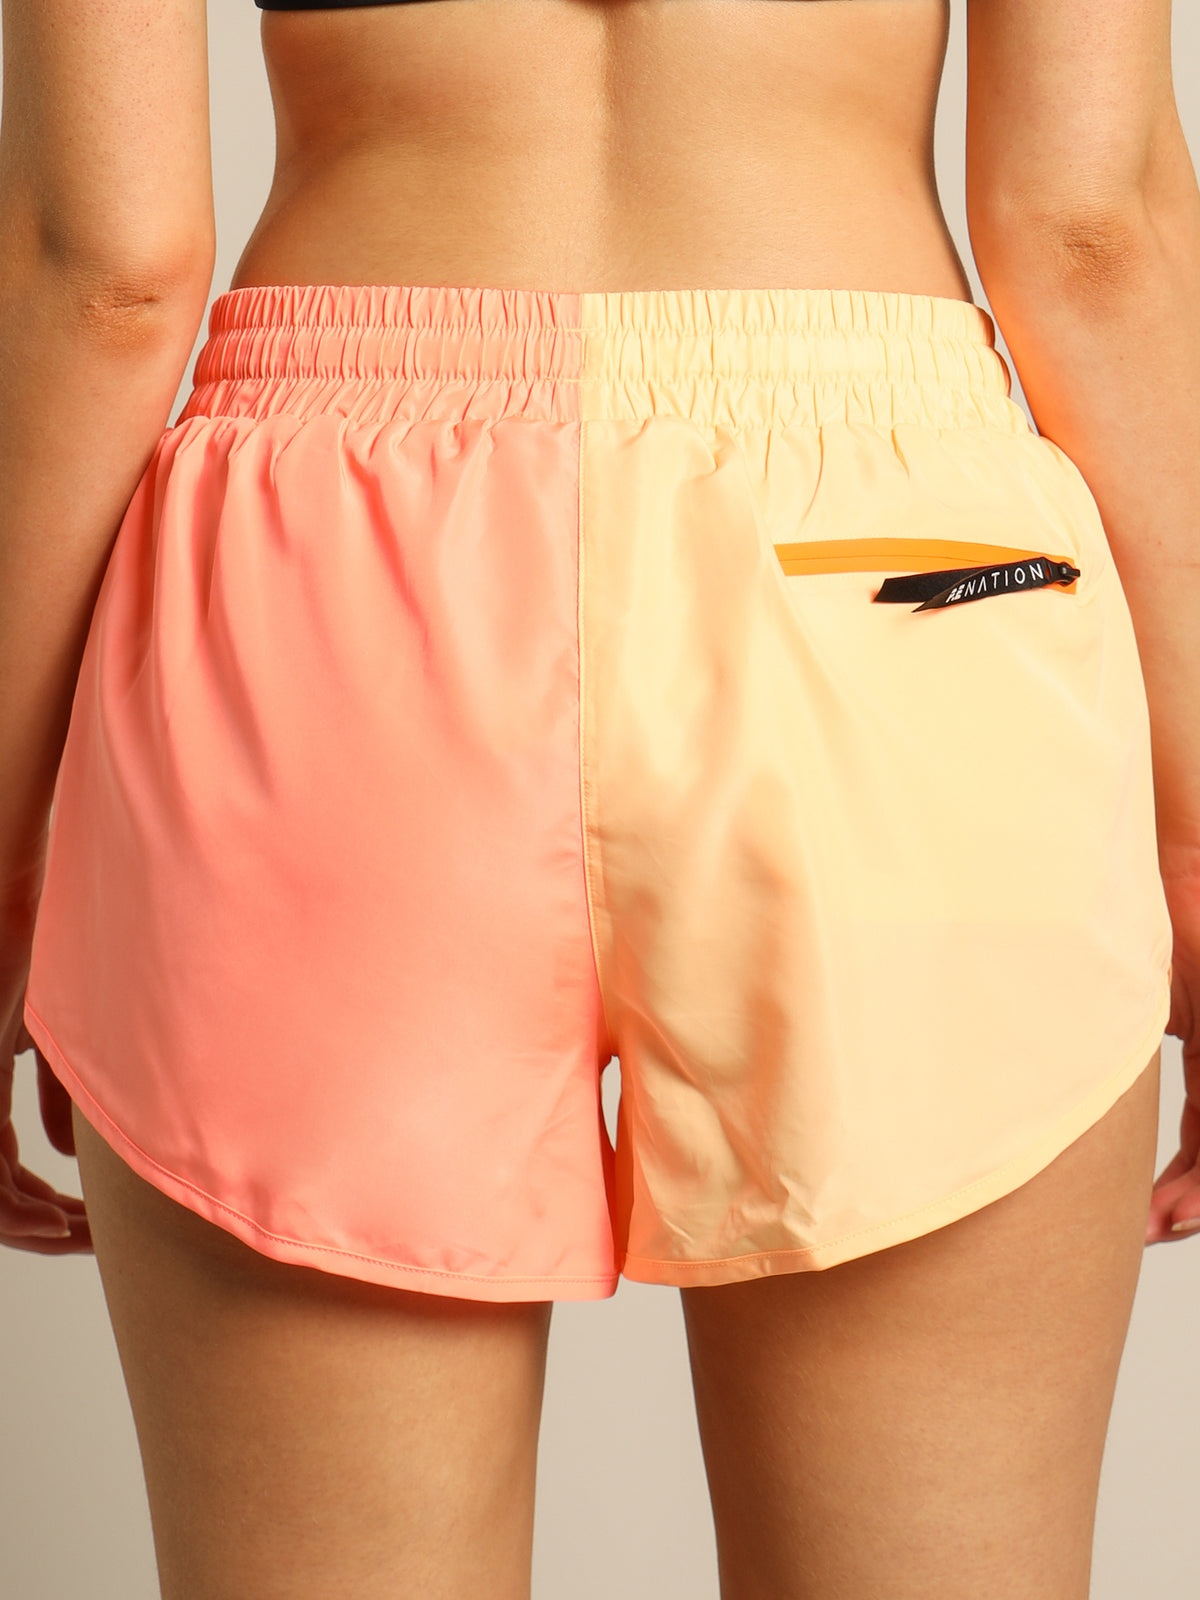 High Ball Shorts in Soft Fiery Coral